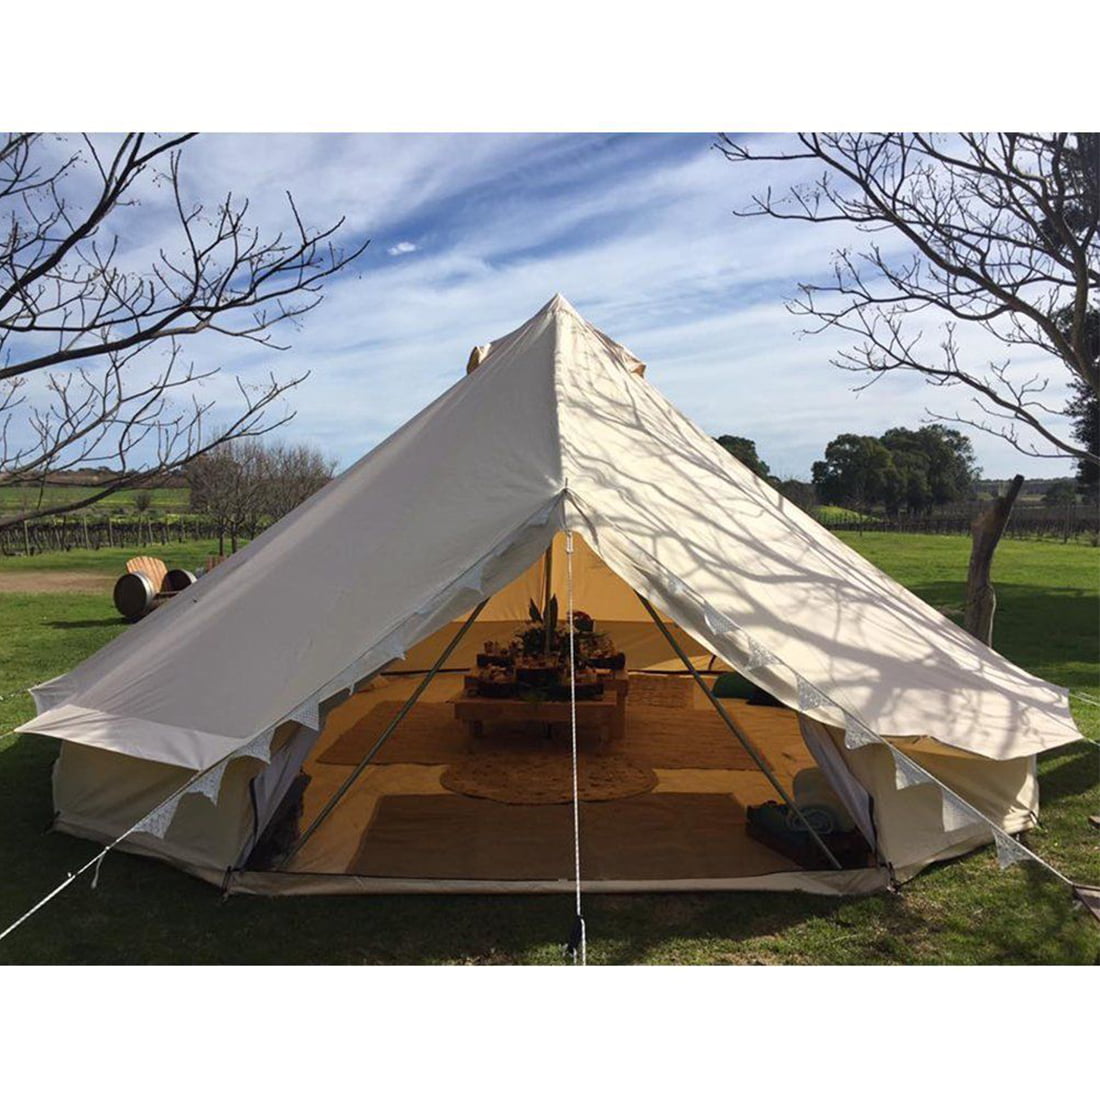 White Teepee Tent Canvas Pavilion Canopy 6 Inch Garden Outdoor Camping Cotton for sale online 